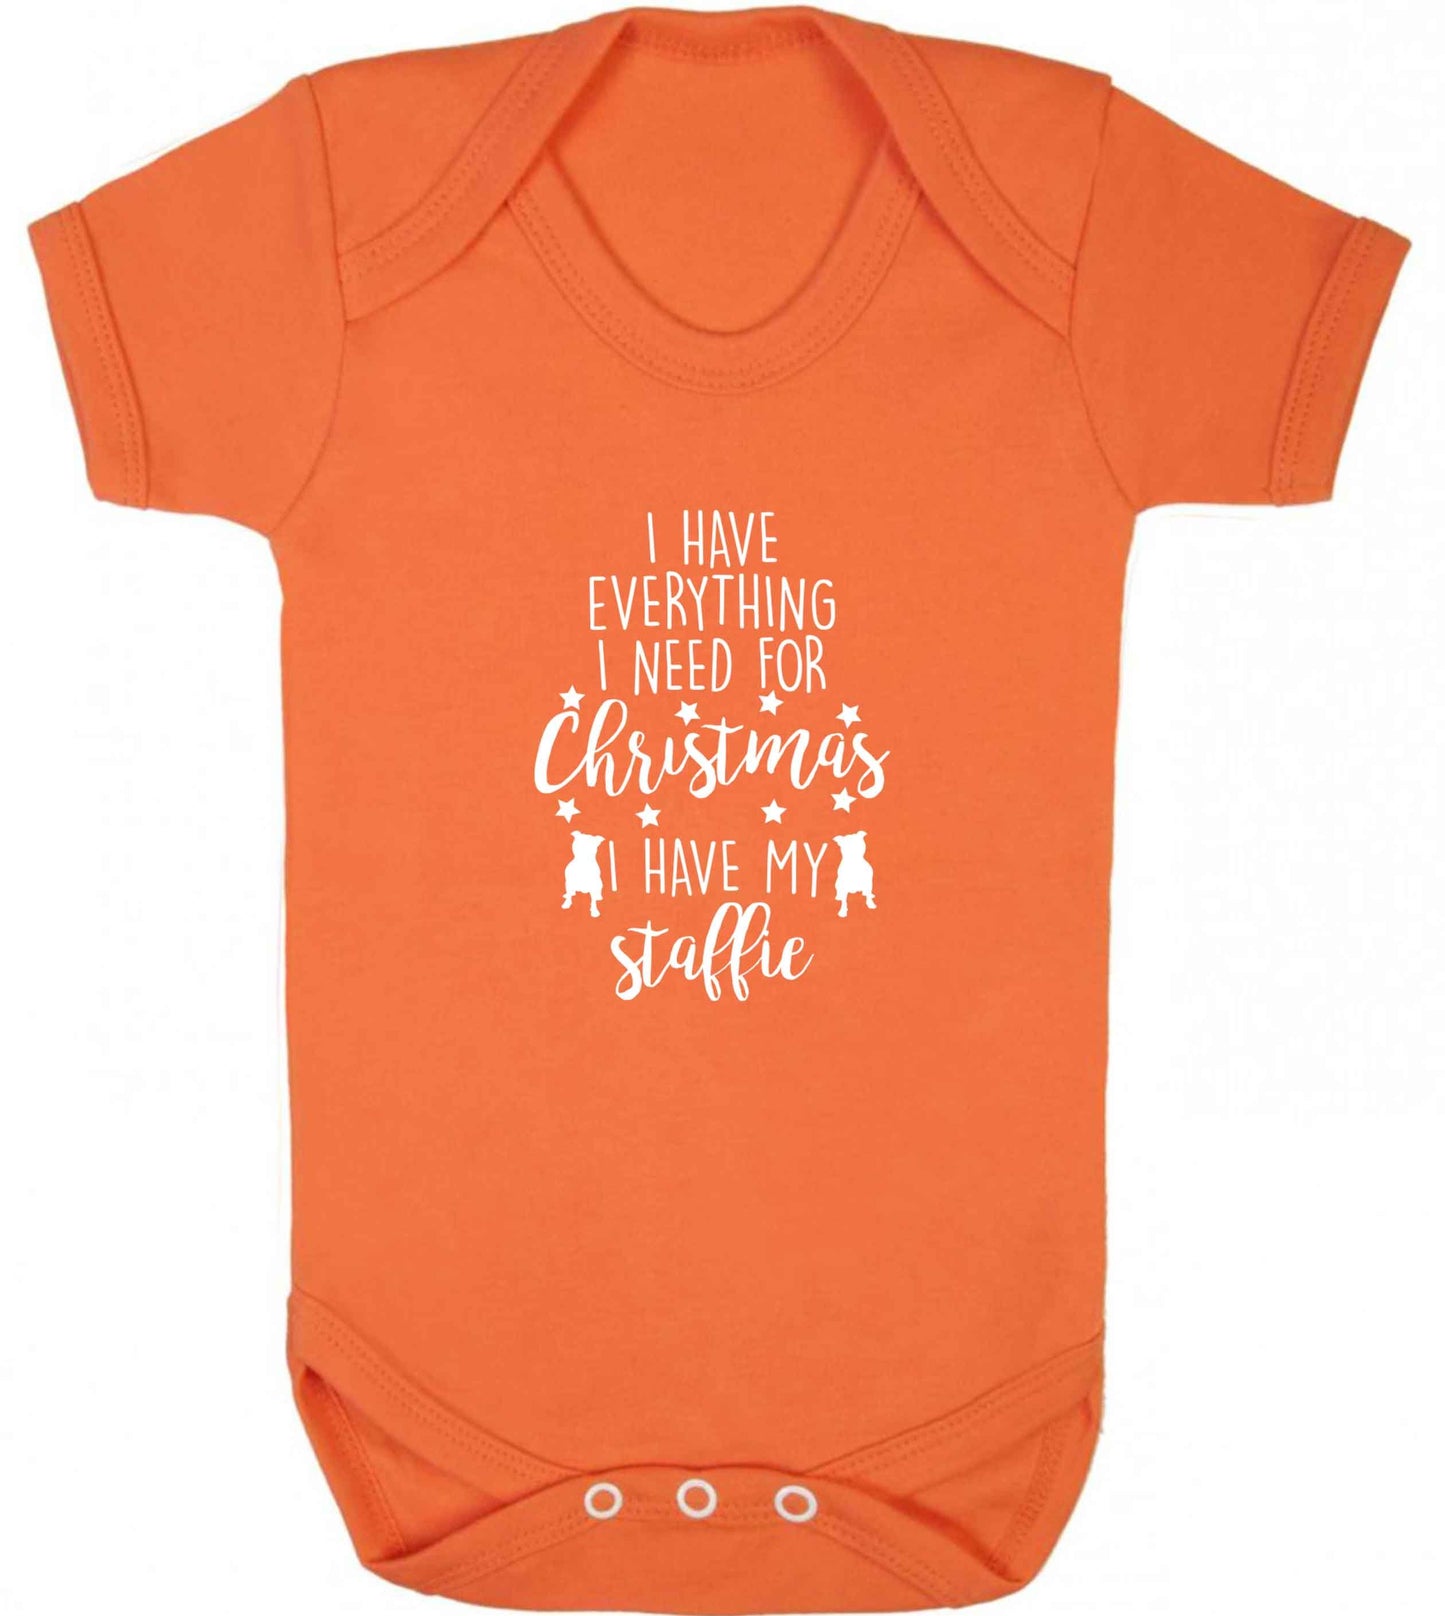 I have everything I need for Christmas I have my staffie baby vest orange 18-24 months